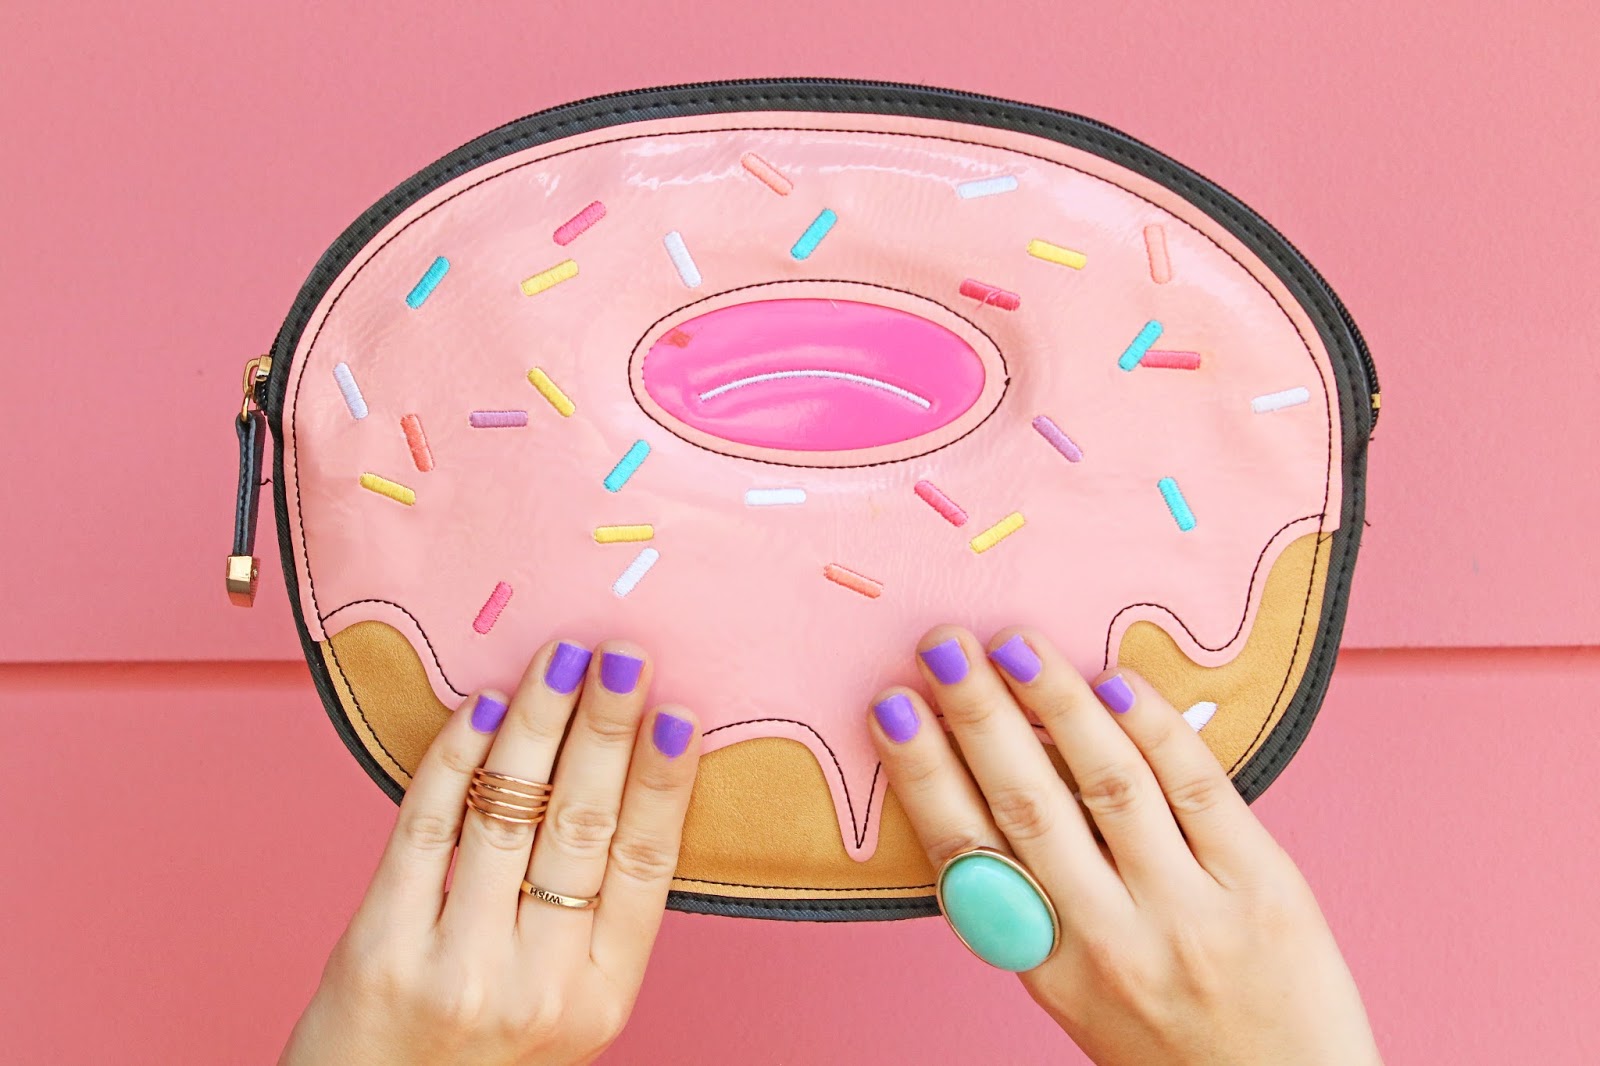 Adorable donut clutch